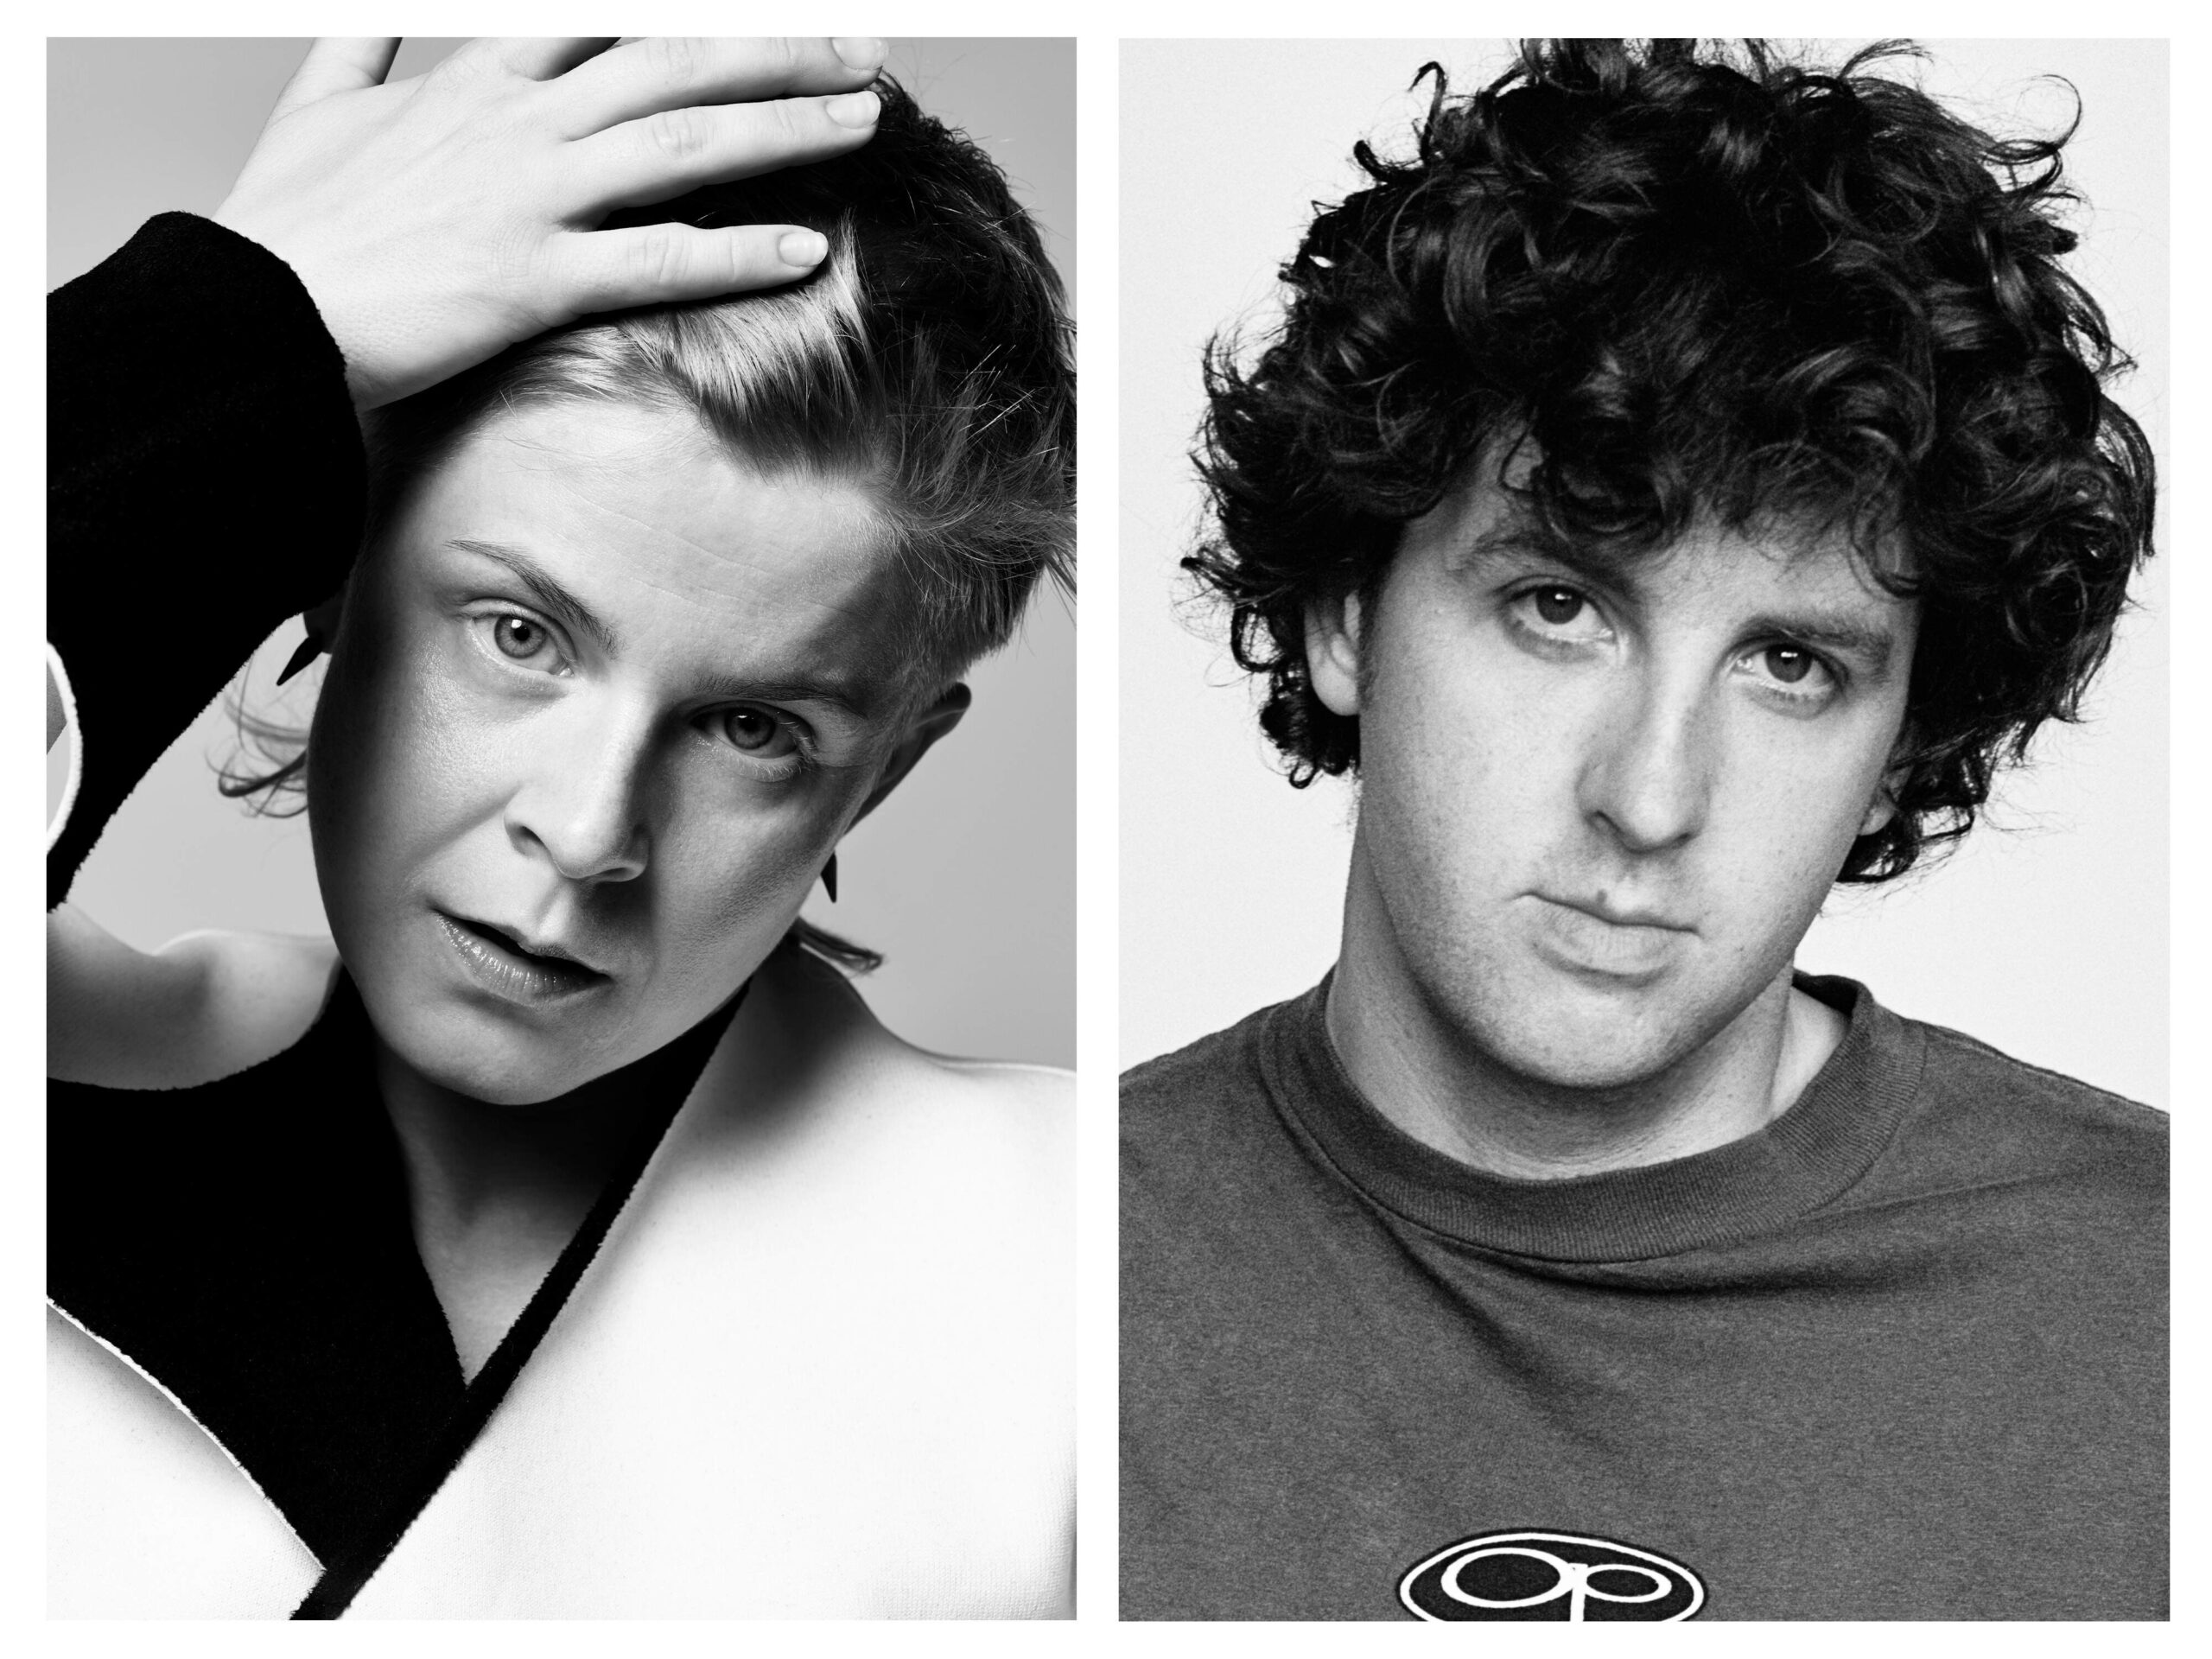 Jamie xx collaborates with Robyn on new disco-influenced single ‘Life’: Listen